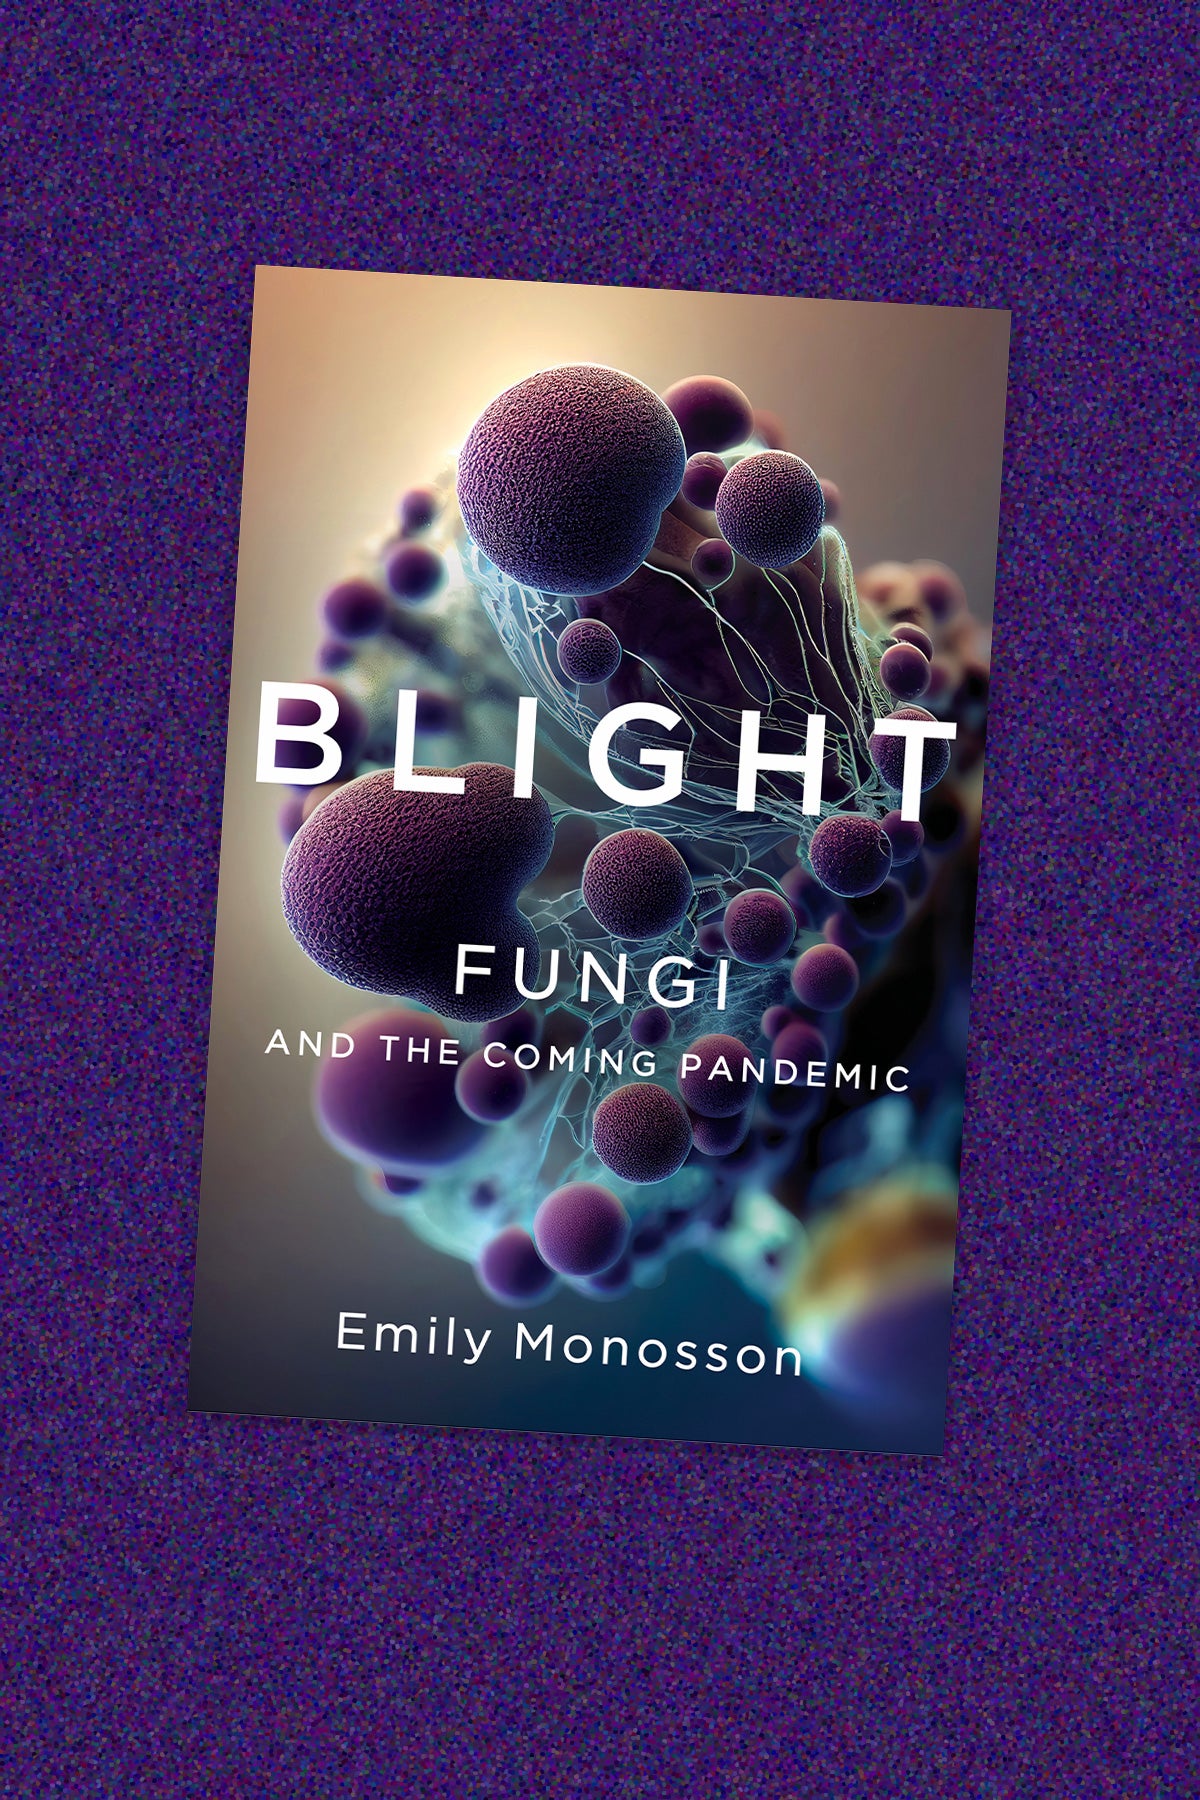 Book cover for “Blight: Fungi and the coming pandemic” by Emily Monsoon. The cover art shows purple microscopic fungi molecules on a beige and blue background. The text is in white. The book cover lays on a purple-speckled background.